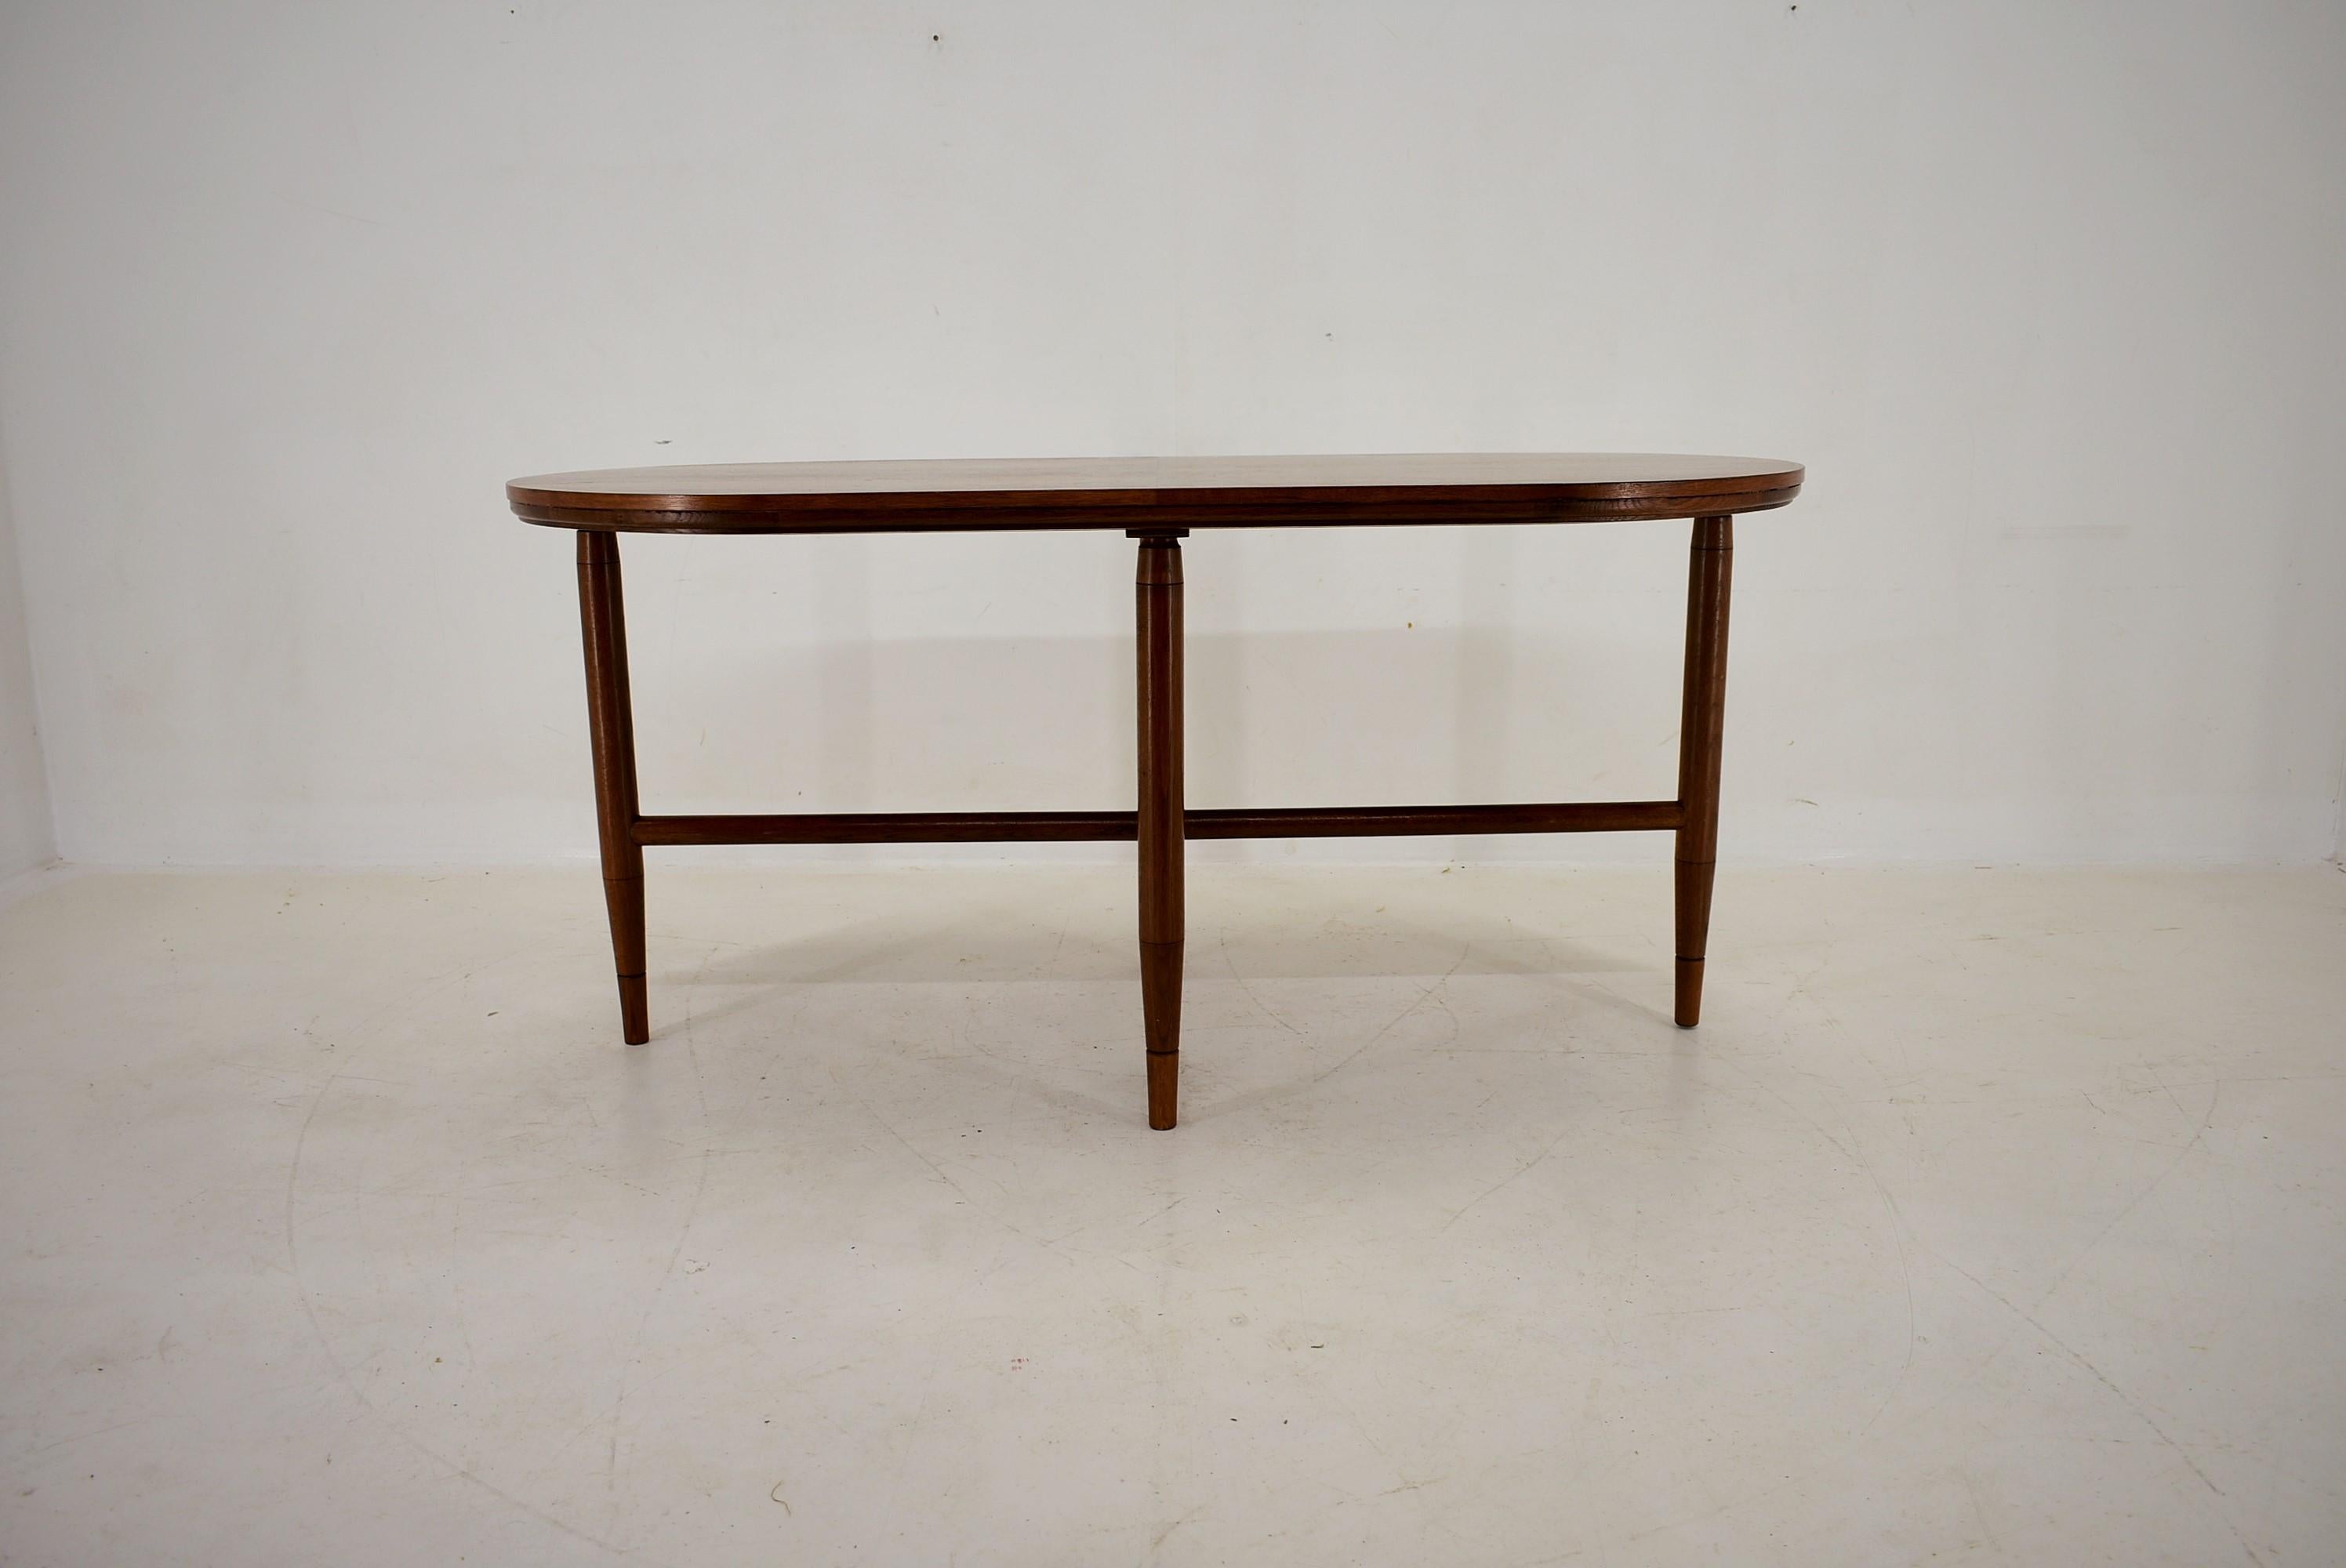 - Made in Czechoslovakia
- Made of beech, veneer.
- The table is Stabil
- Good condition.
- Cleaned.